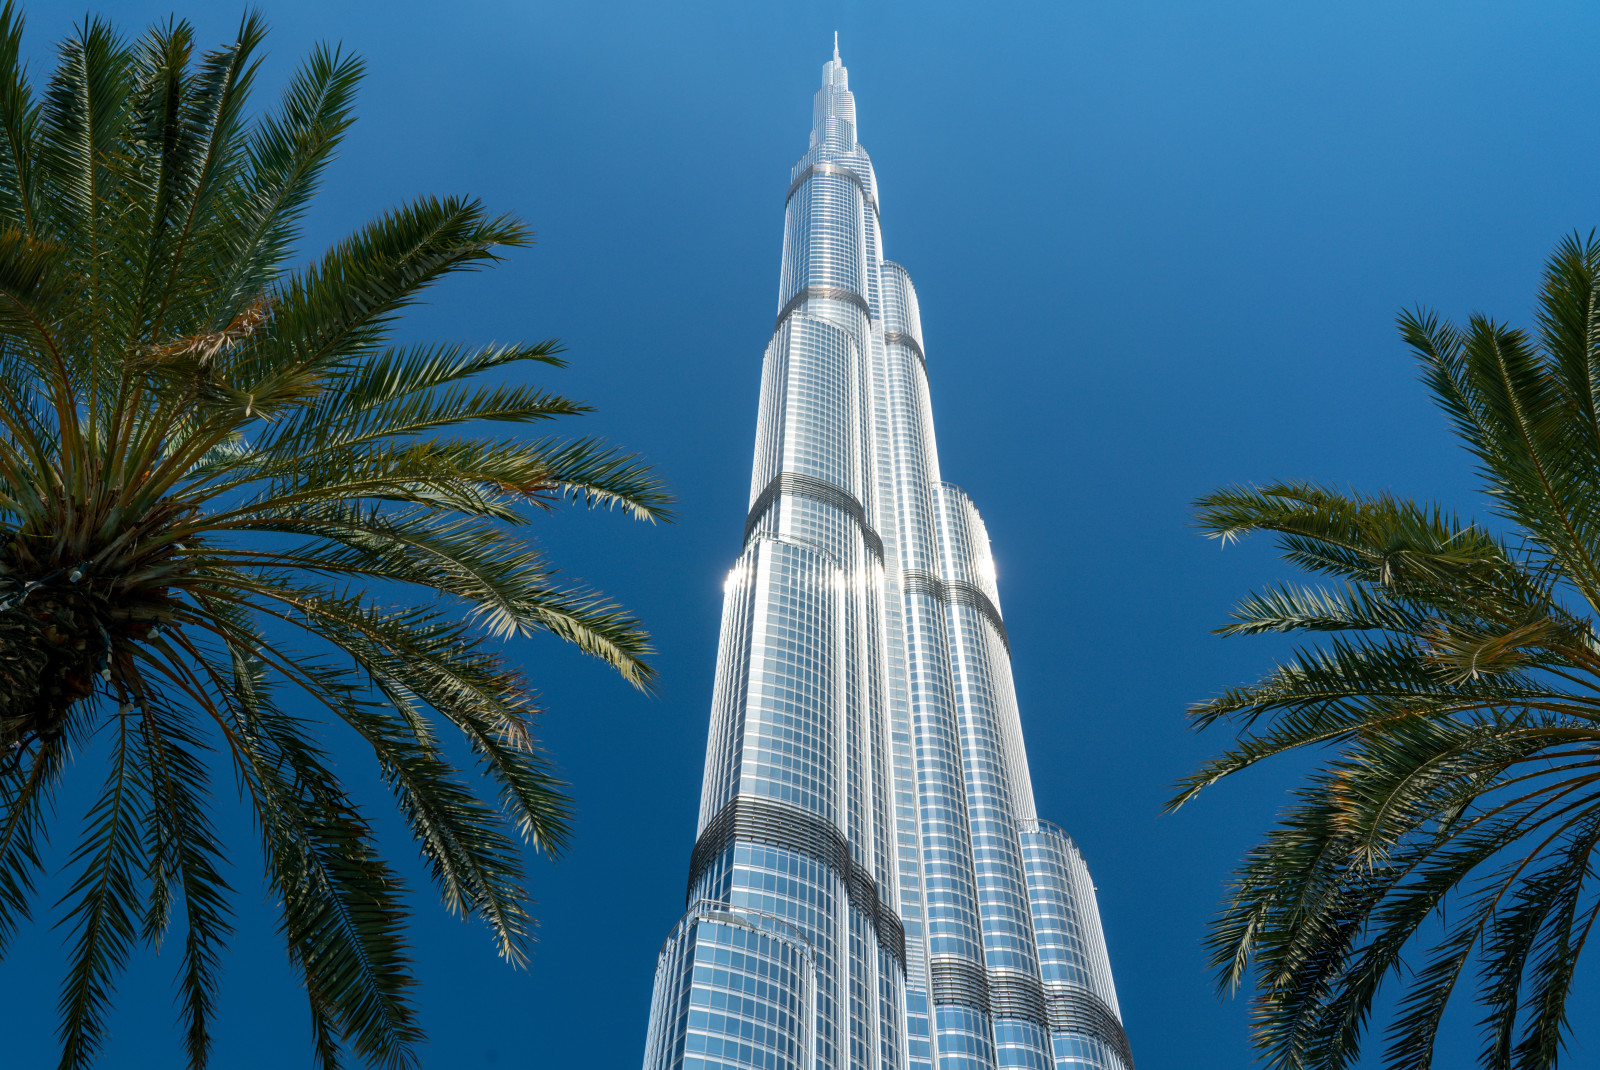 Street view of the current tallest building in the world, the Burj Khalifa in Dubai

